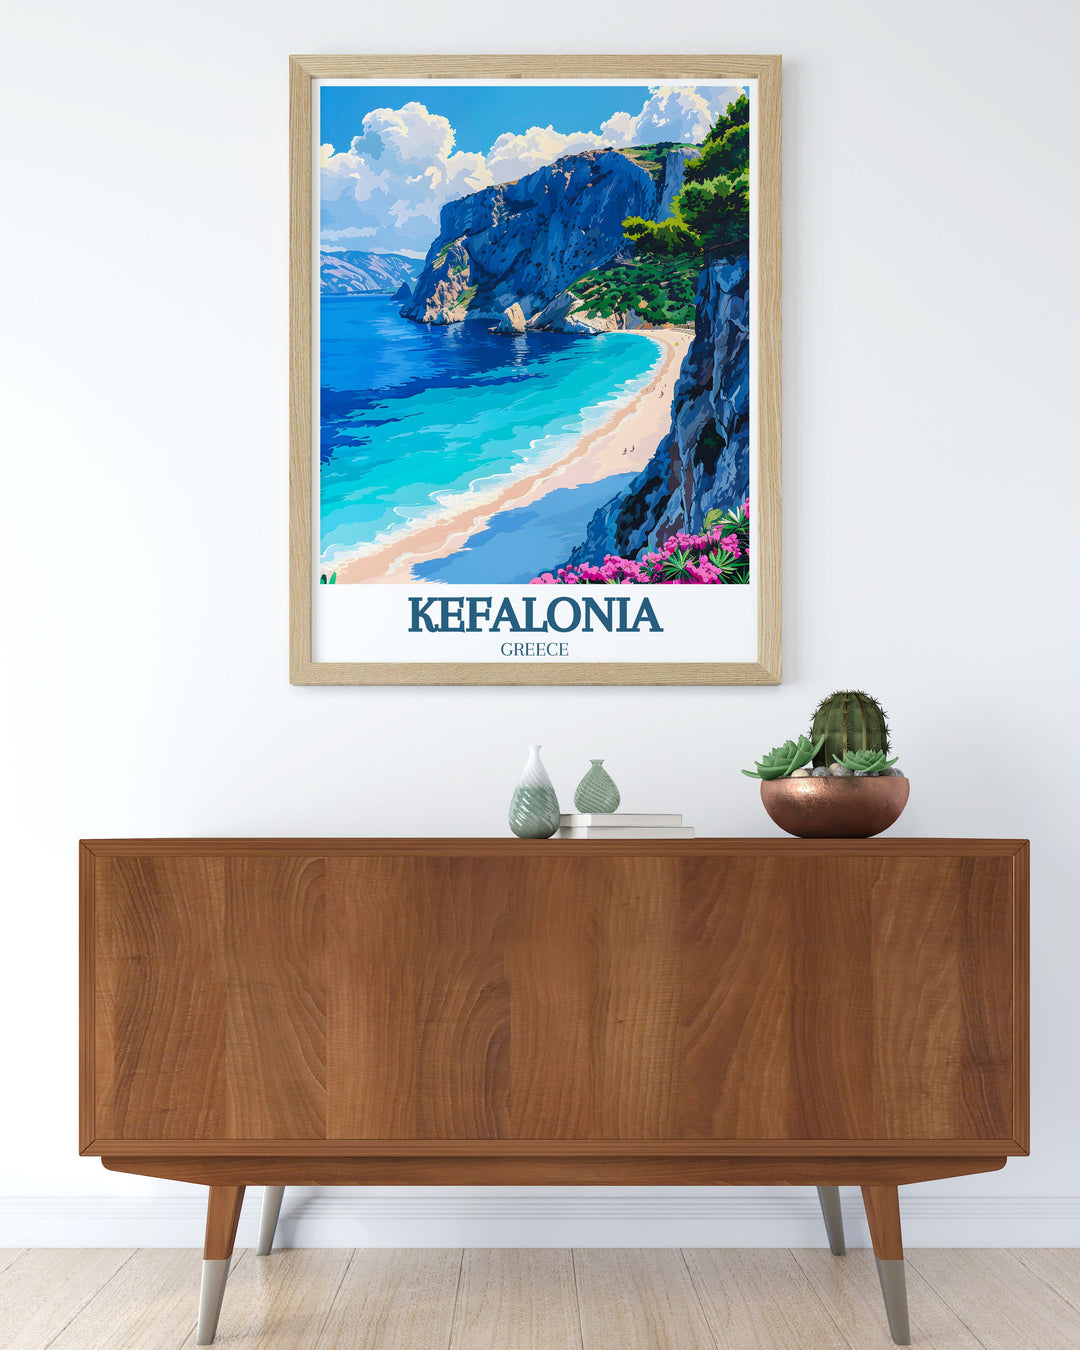 An art print of Agia Dynati, showcasing the mountains rich biodiversity and picturesque landscapes. The fine line design emphasizes the natural beauty and adventure that await on this Kefalonian peak.